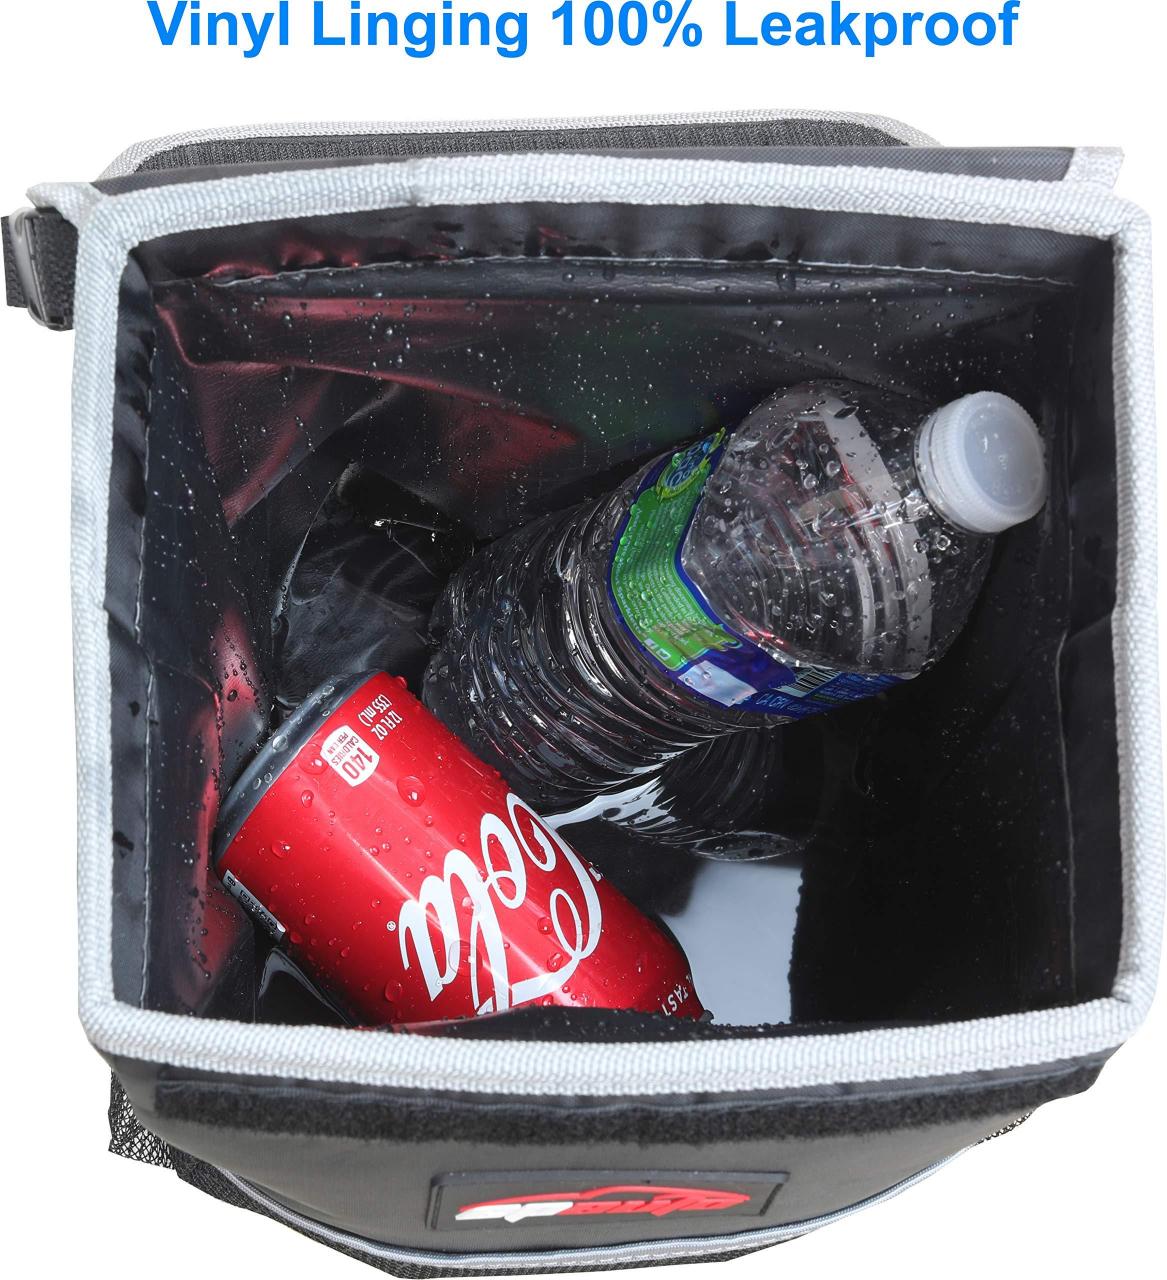 EPAuto Car Trash Can with Lid